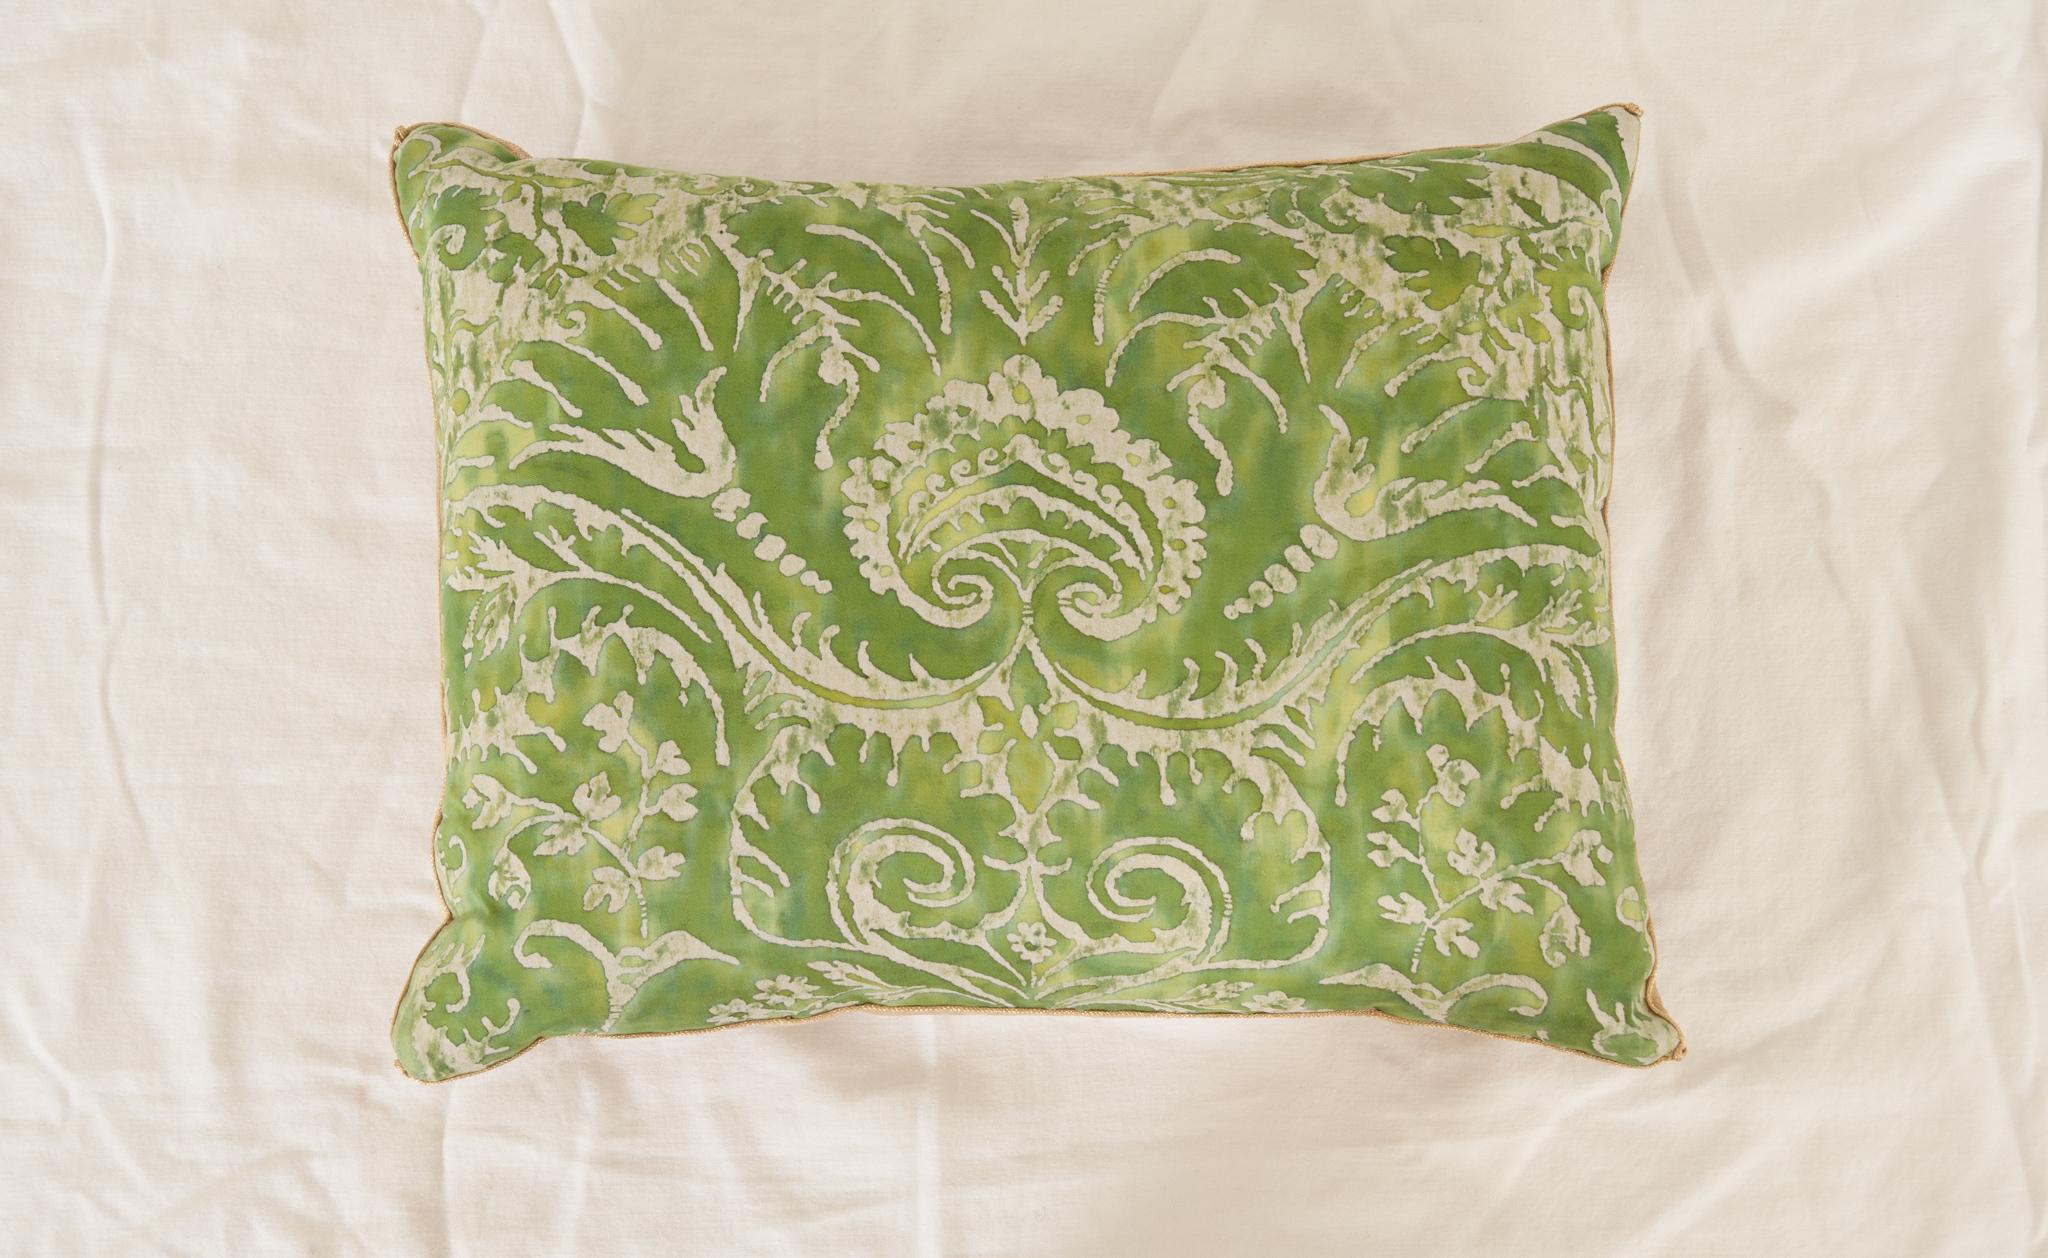 Antique European pillow in green and white, backed with champagne velvet. Hand trimmed with vintage gold metallic galon, knotted in the corners.